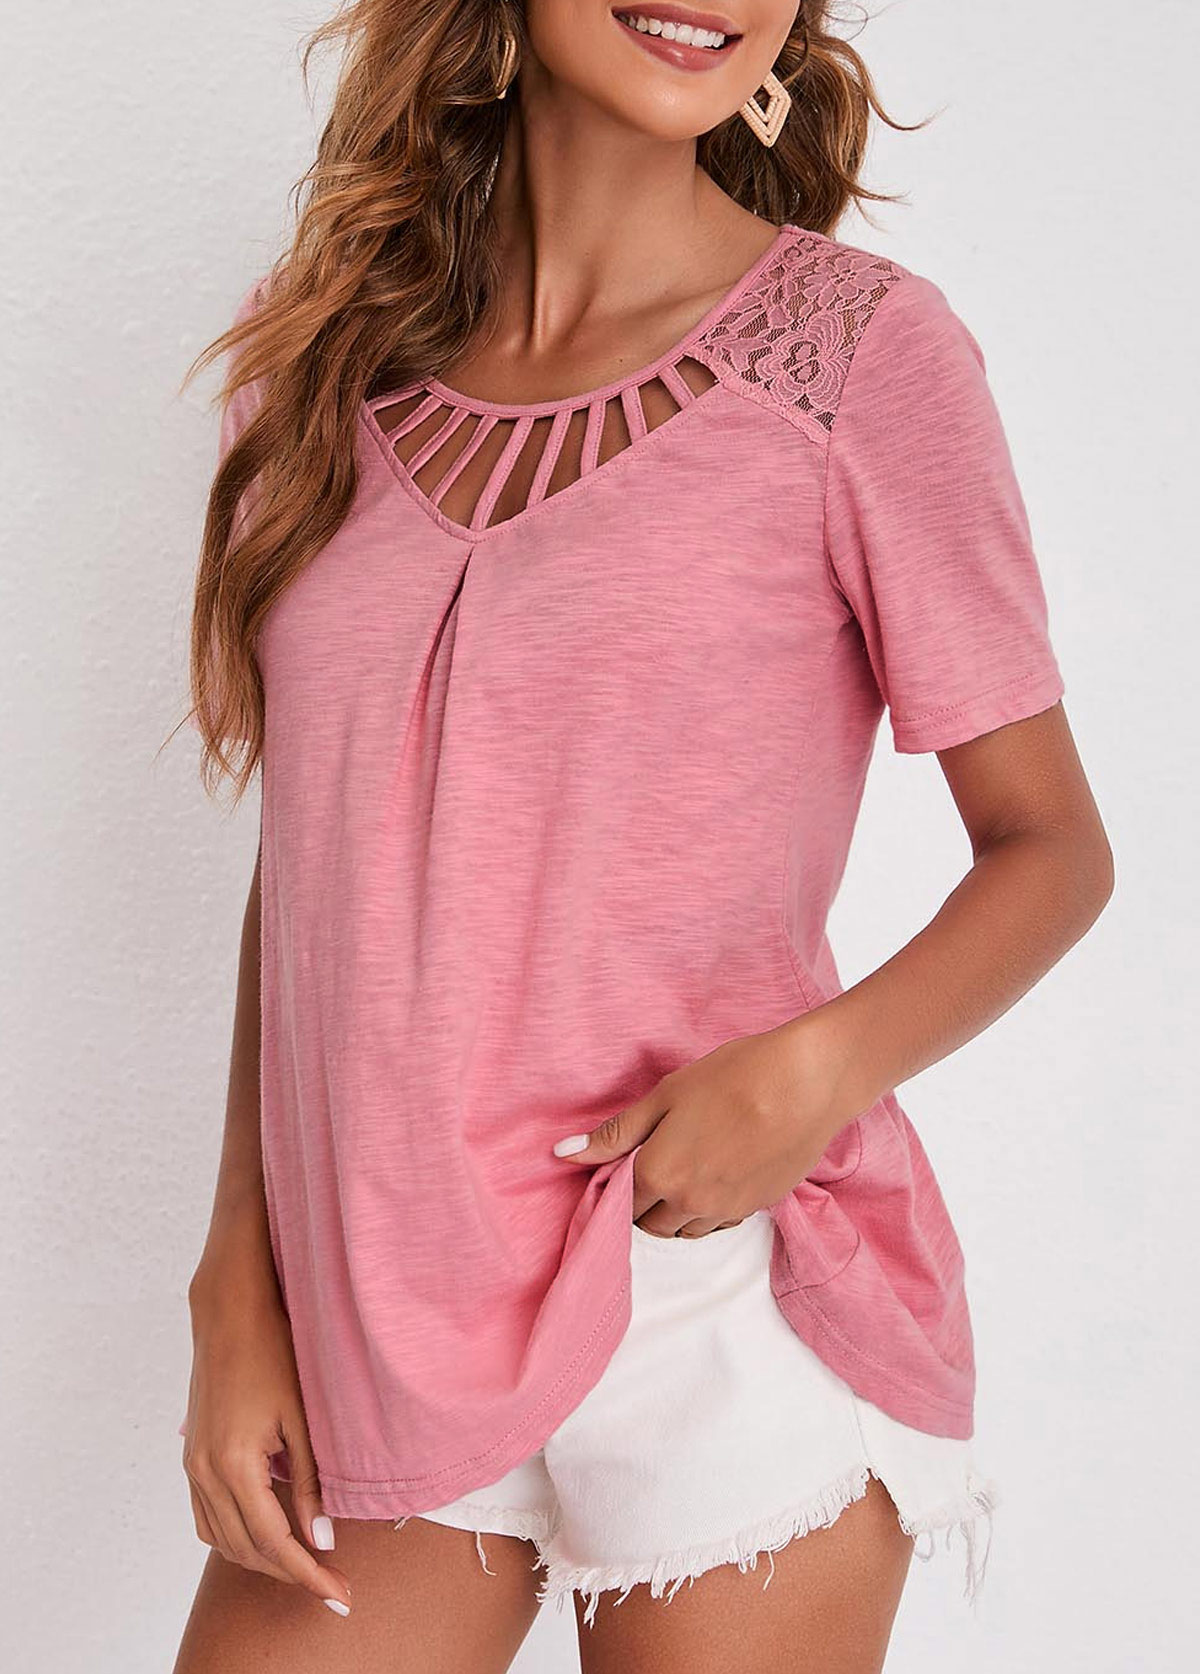 Cage Neck Lace Patchwork Pink T Shirt